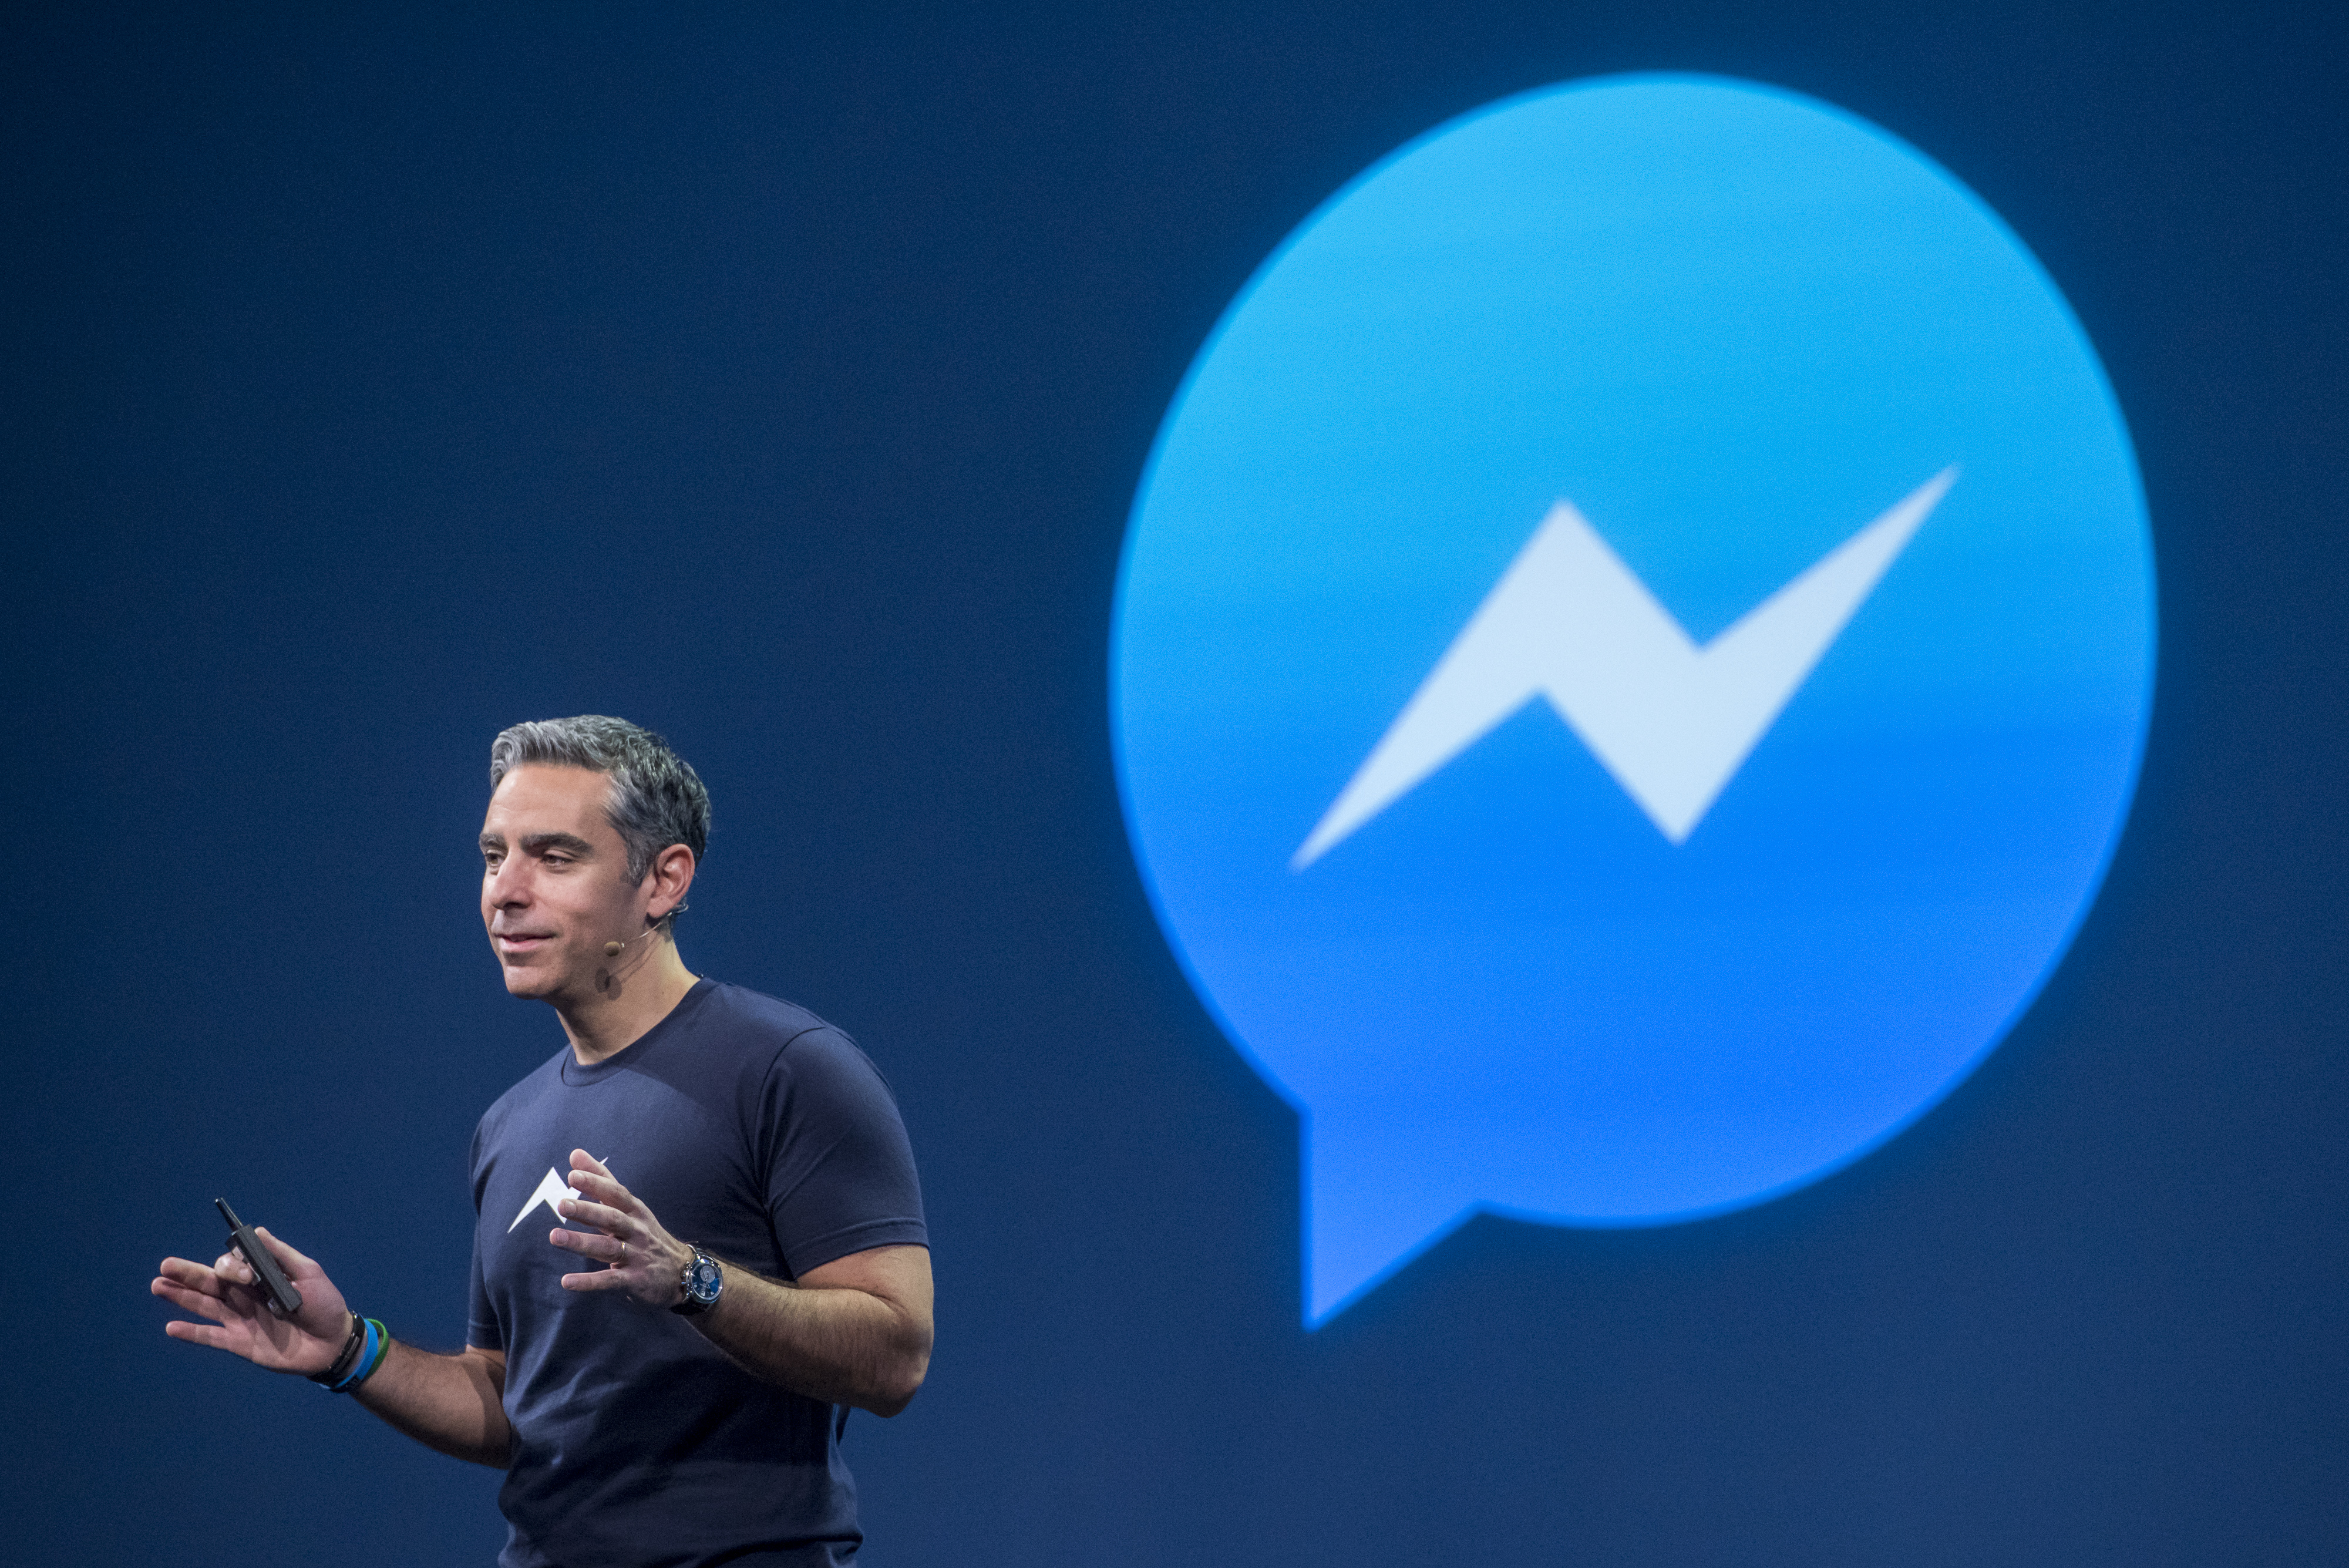 David Marcus, vice president of messaging products at Facebook Inc., speaks during the Facebook F8 Developers Conference in San Francisco, California, U.S., on Wednesday, March 25, 2015. (Bloomberg—Bloomberg via Getty Images)